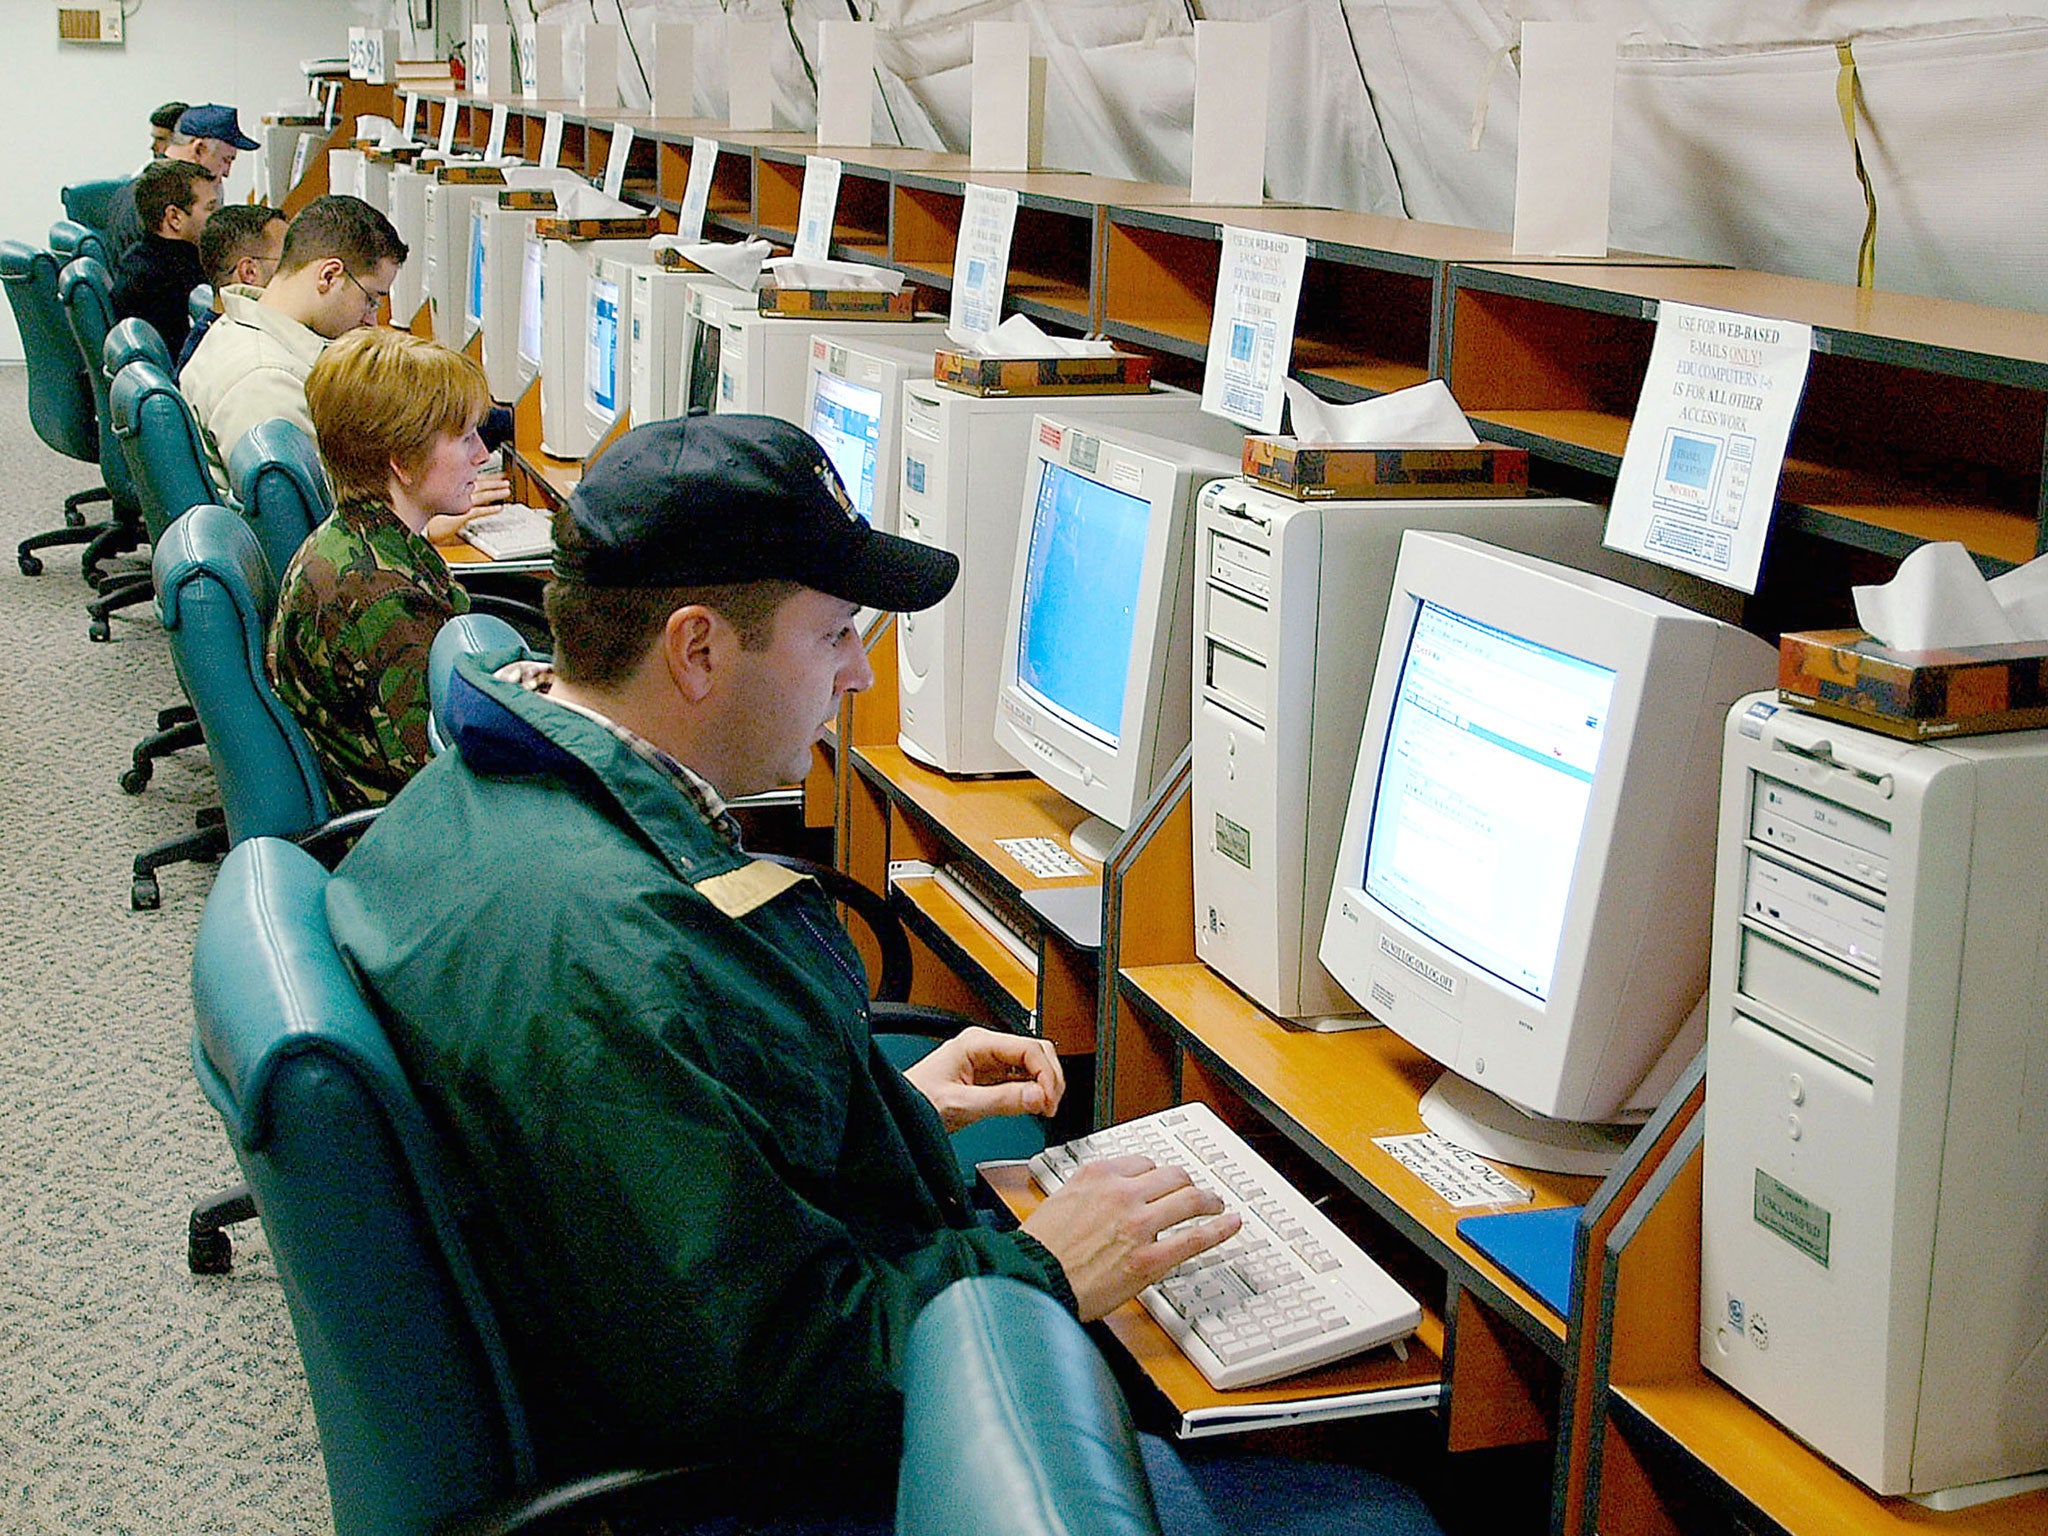 American military personnel deployed in support of Operation Northern Watch send emails in the morale tent at Hodja Village February 3, 2002 at Incirlik Air Base, Turkey.